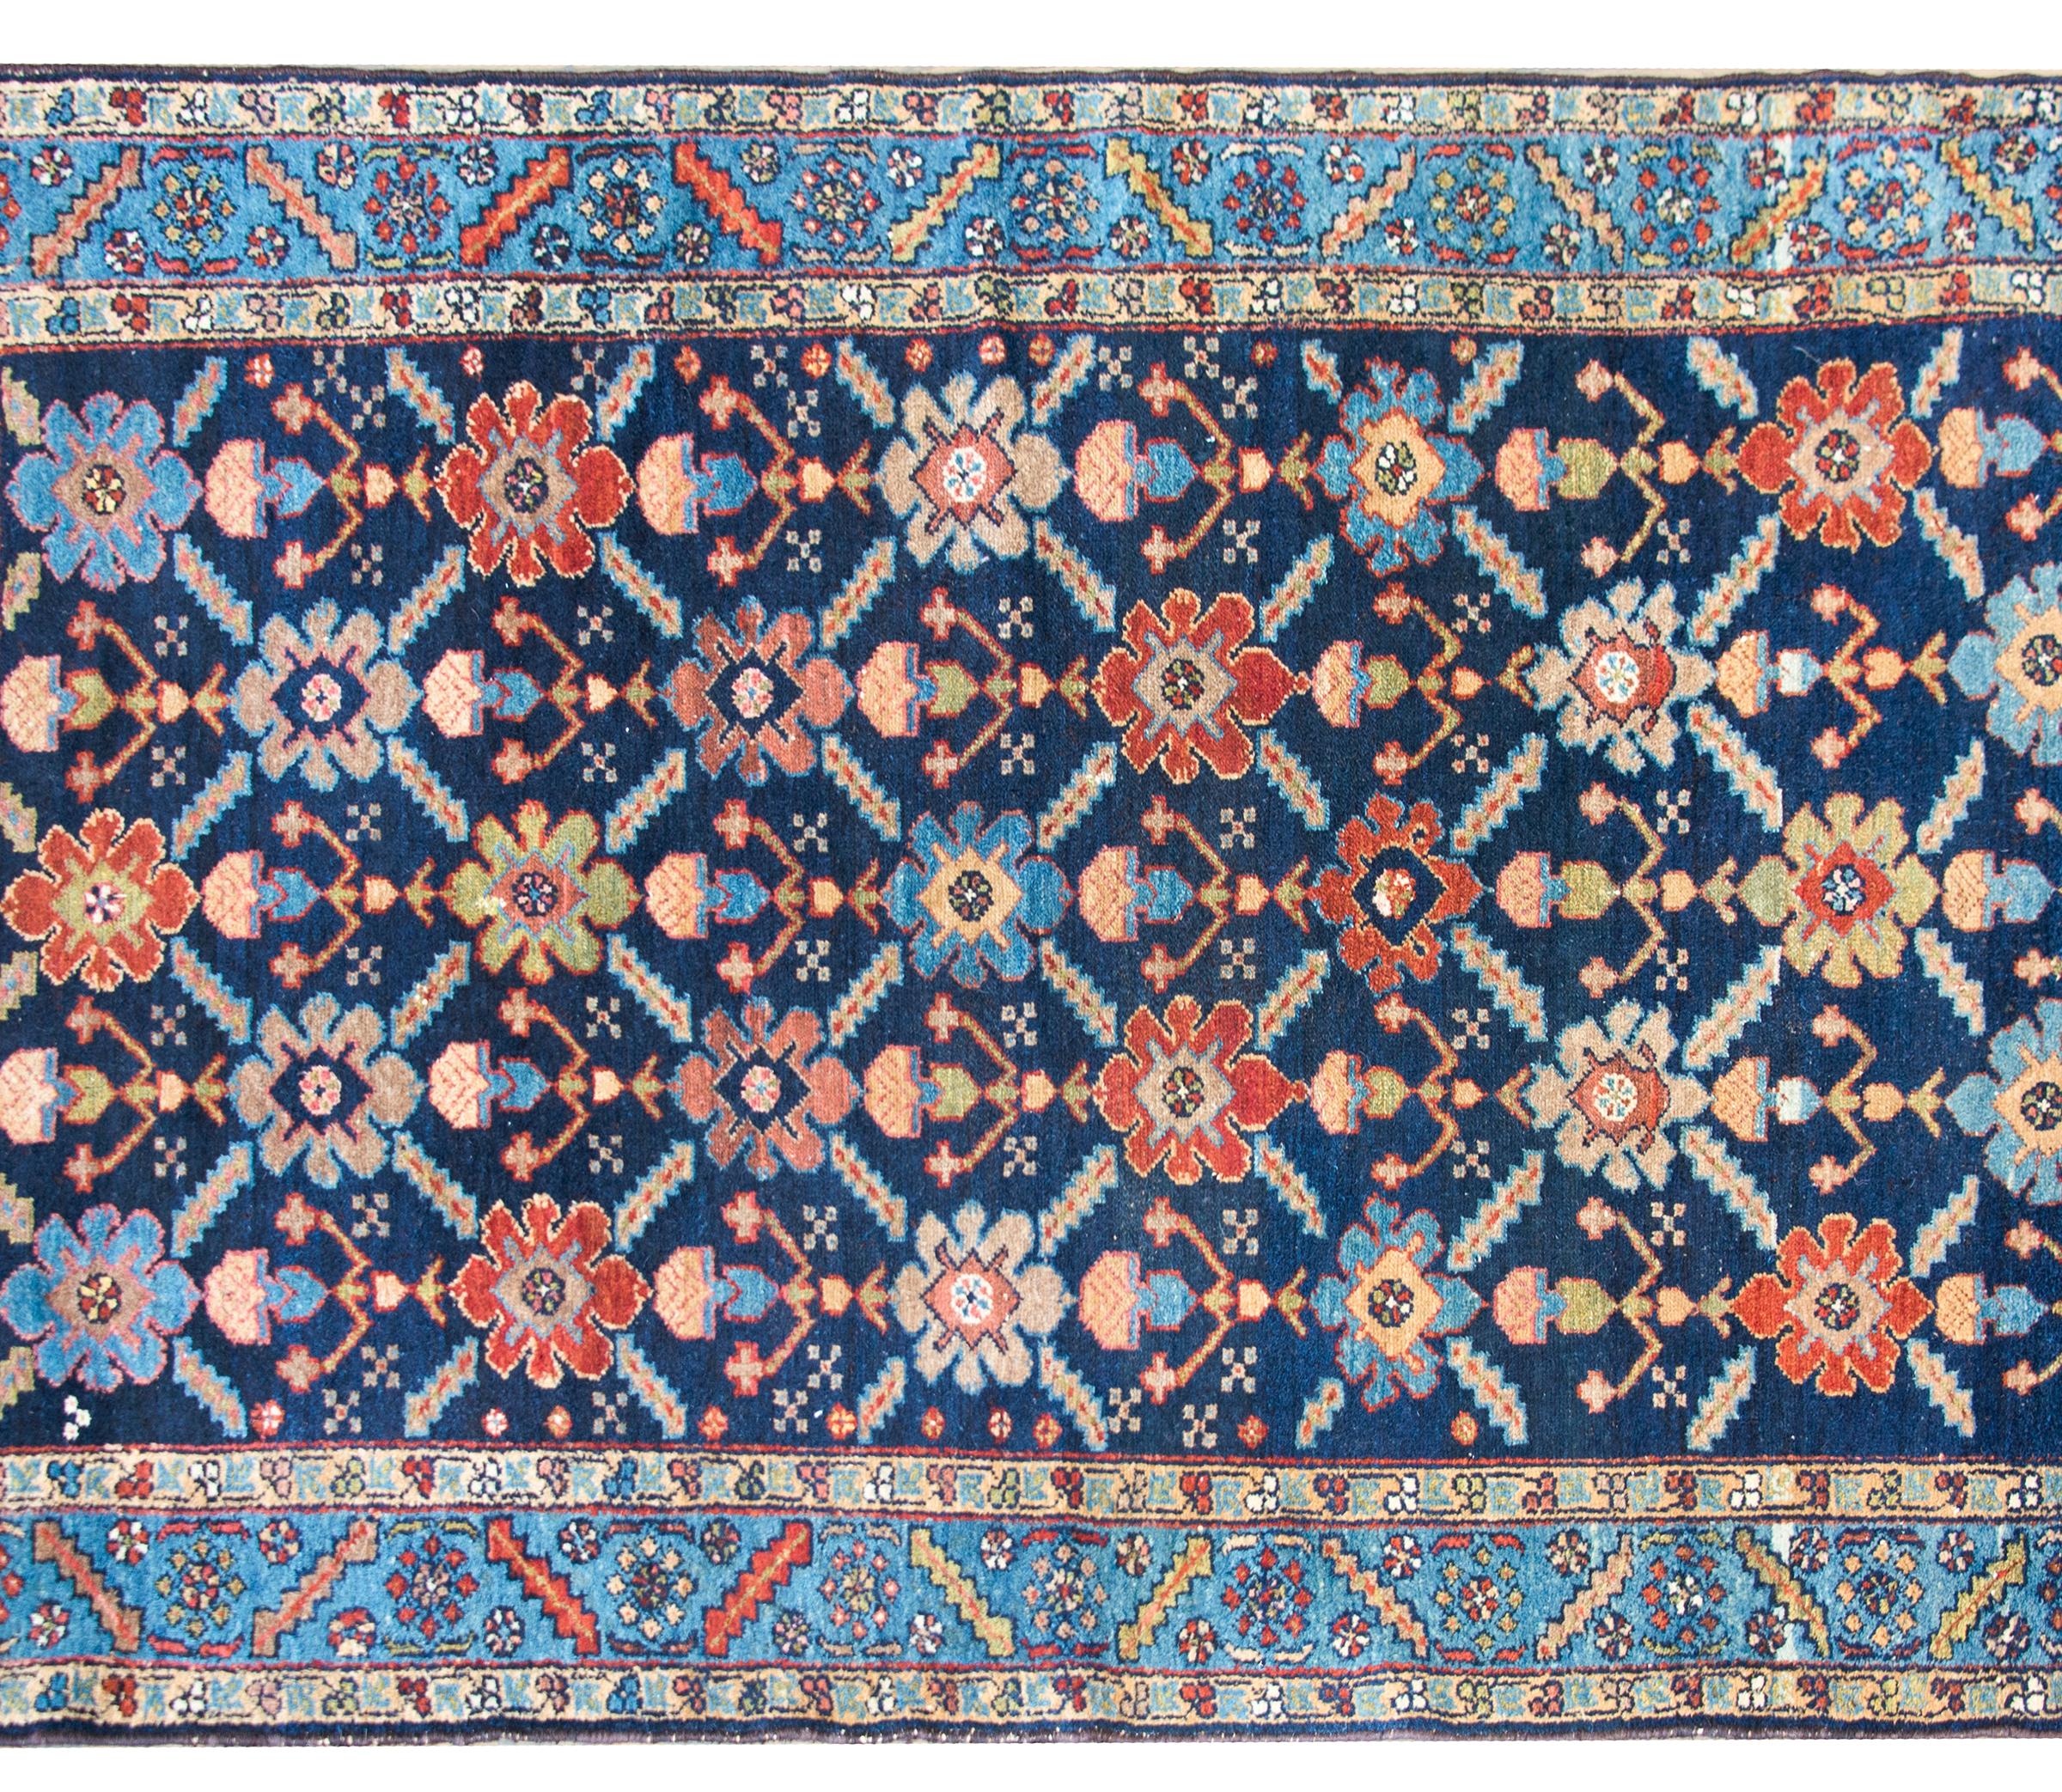 Early 20th Century Persian Bakhtiari Rug In Good Condition For Sale In Chicago, IL